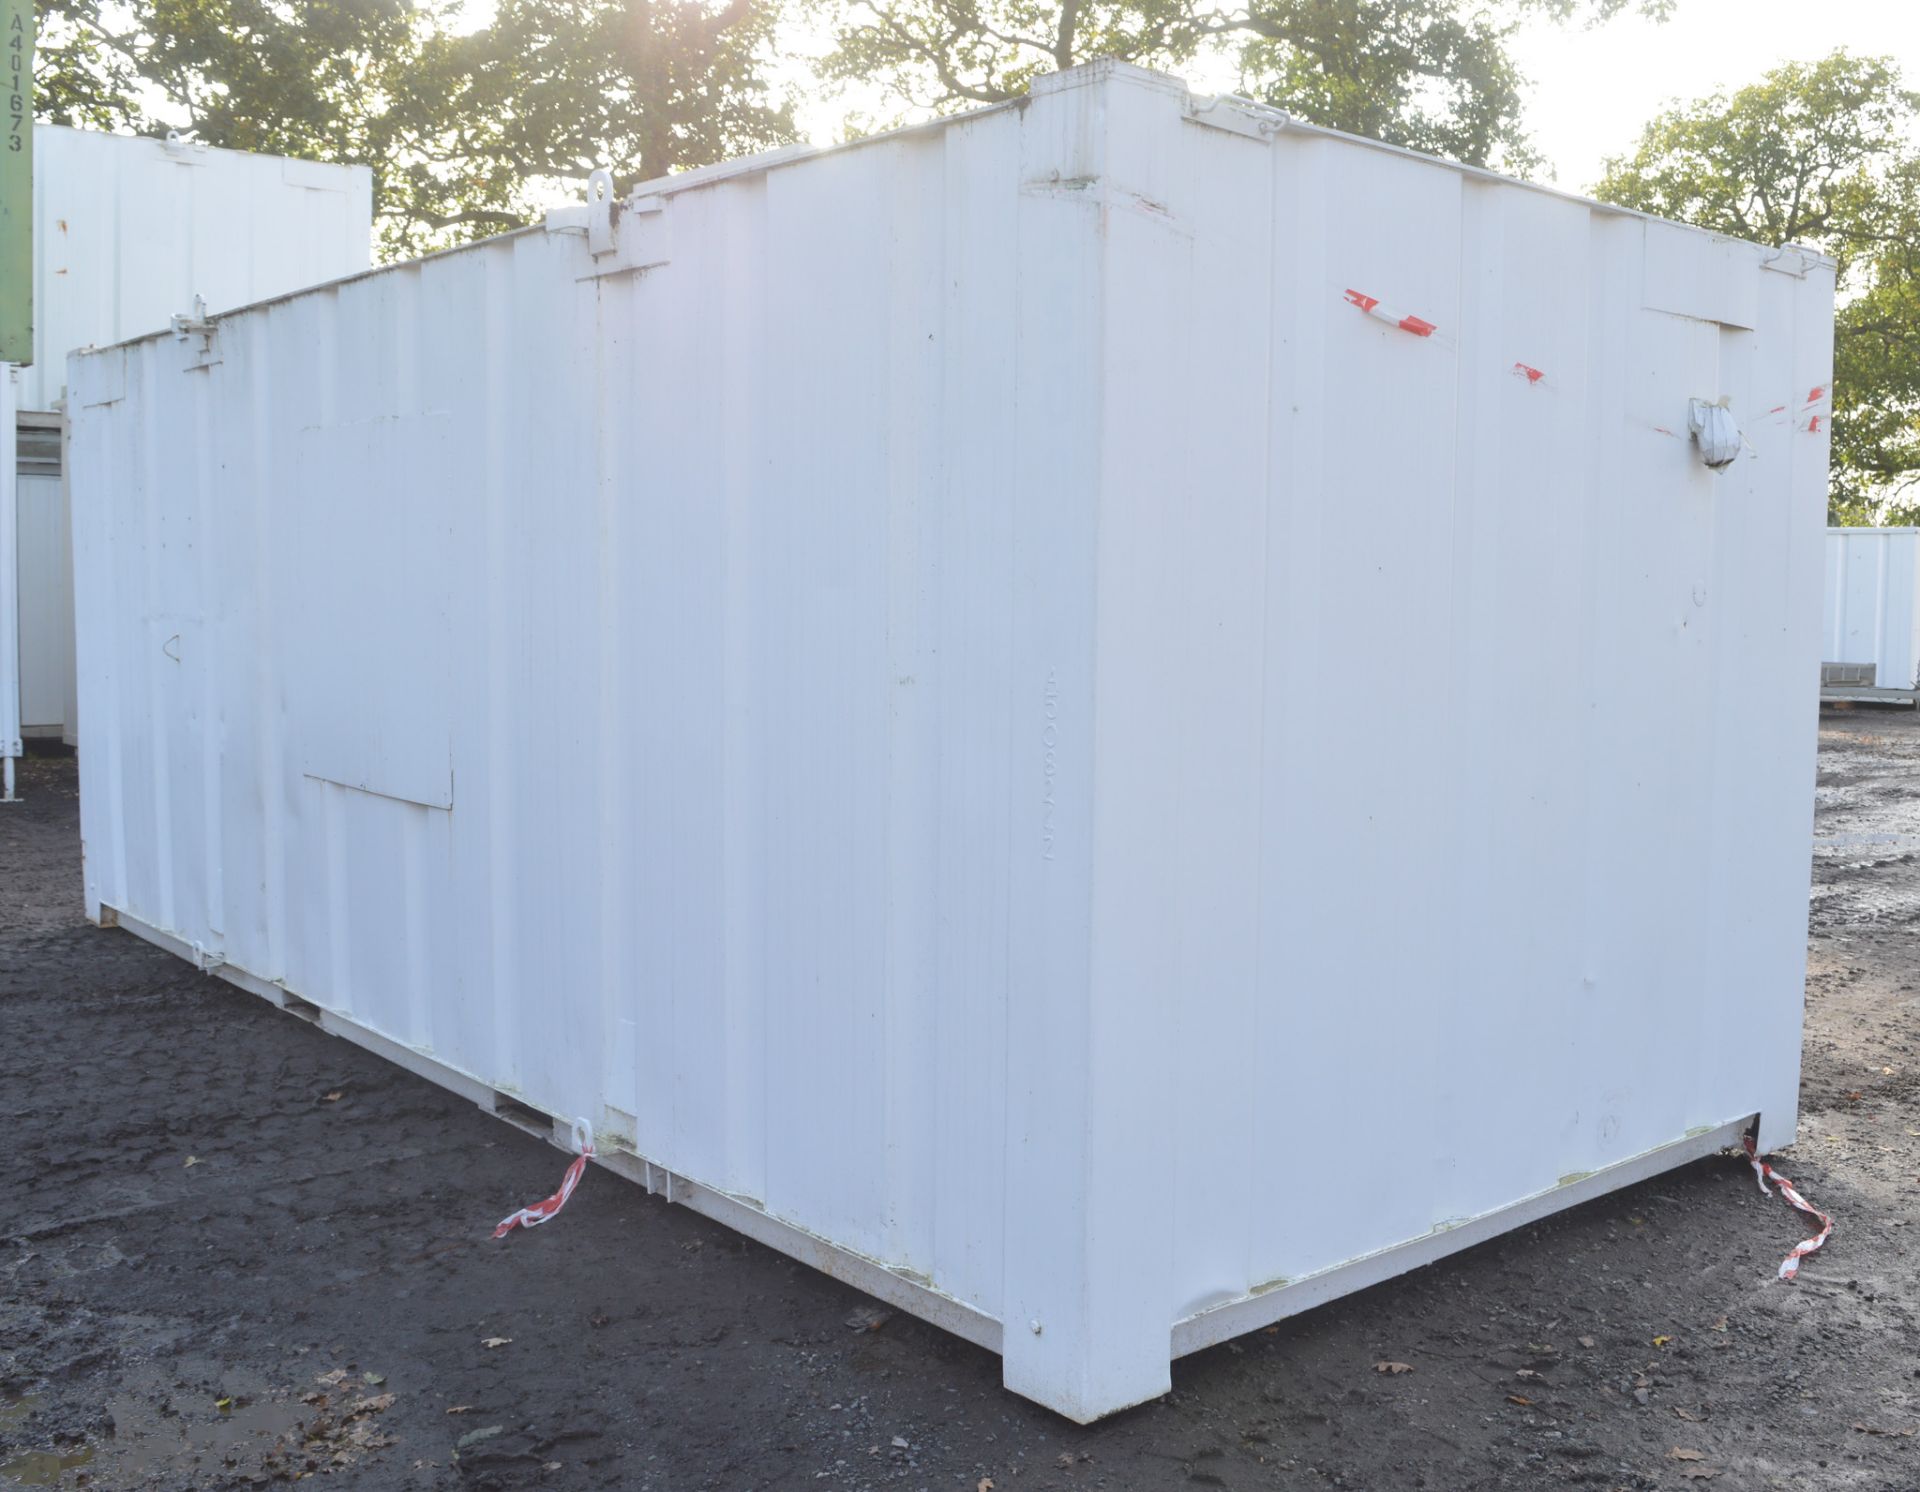 21 ft x 9 ft steel anti vandal shipping container  c/w keys in office  A508242 - Bild 2 aus 6